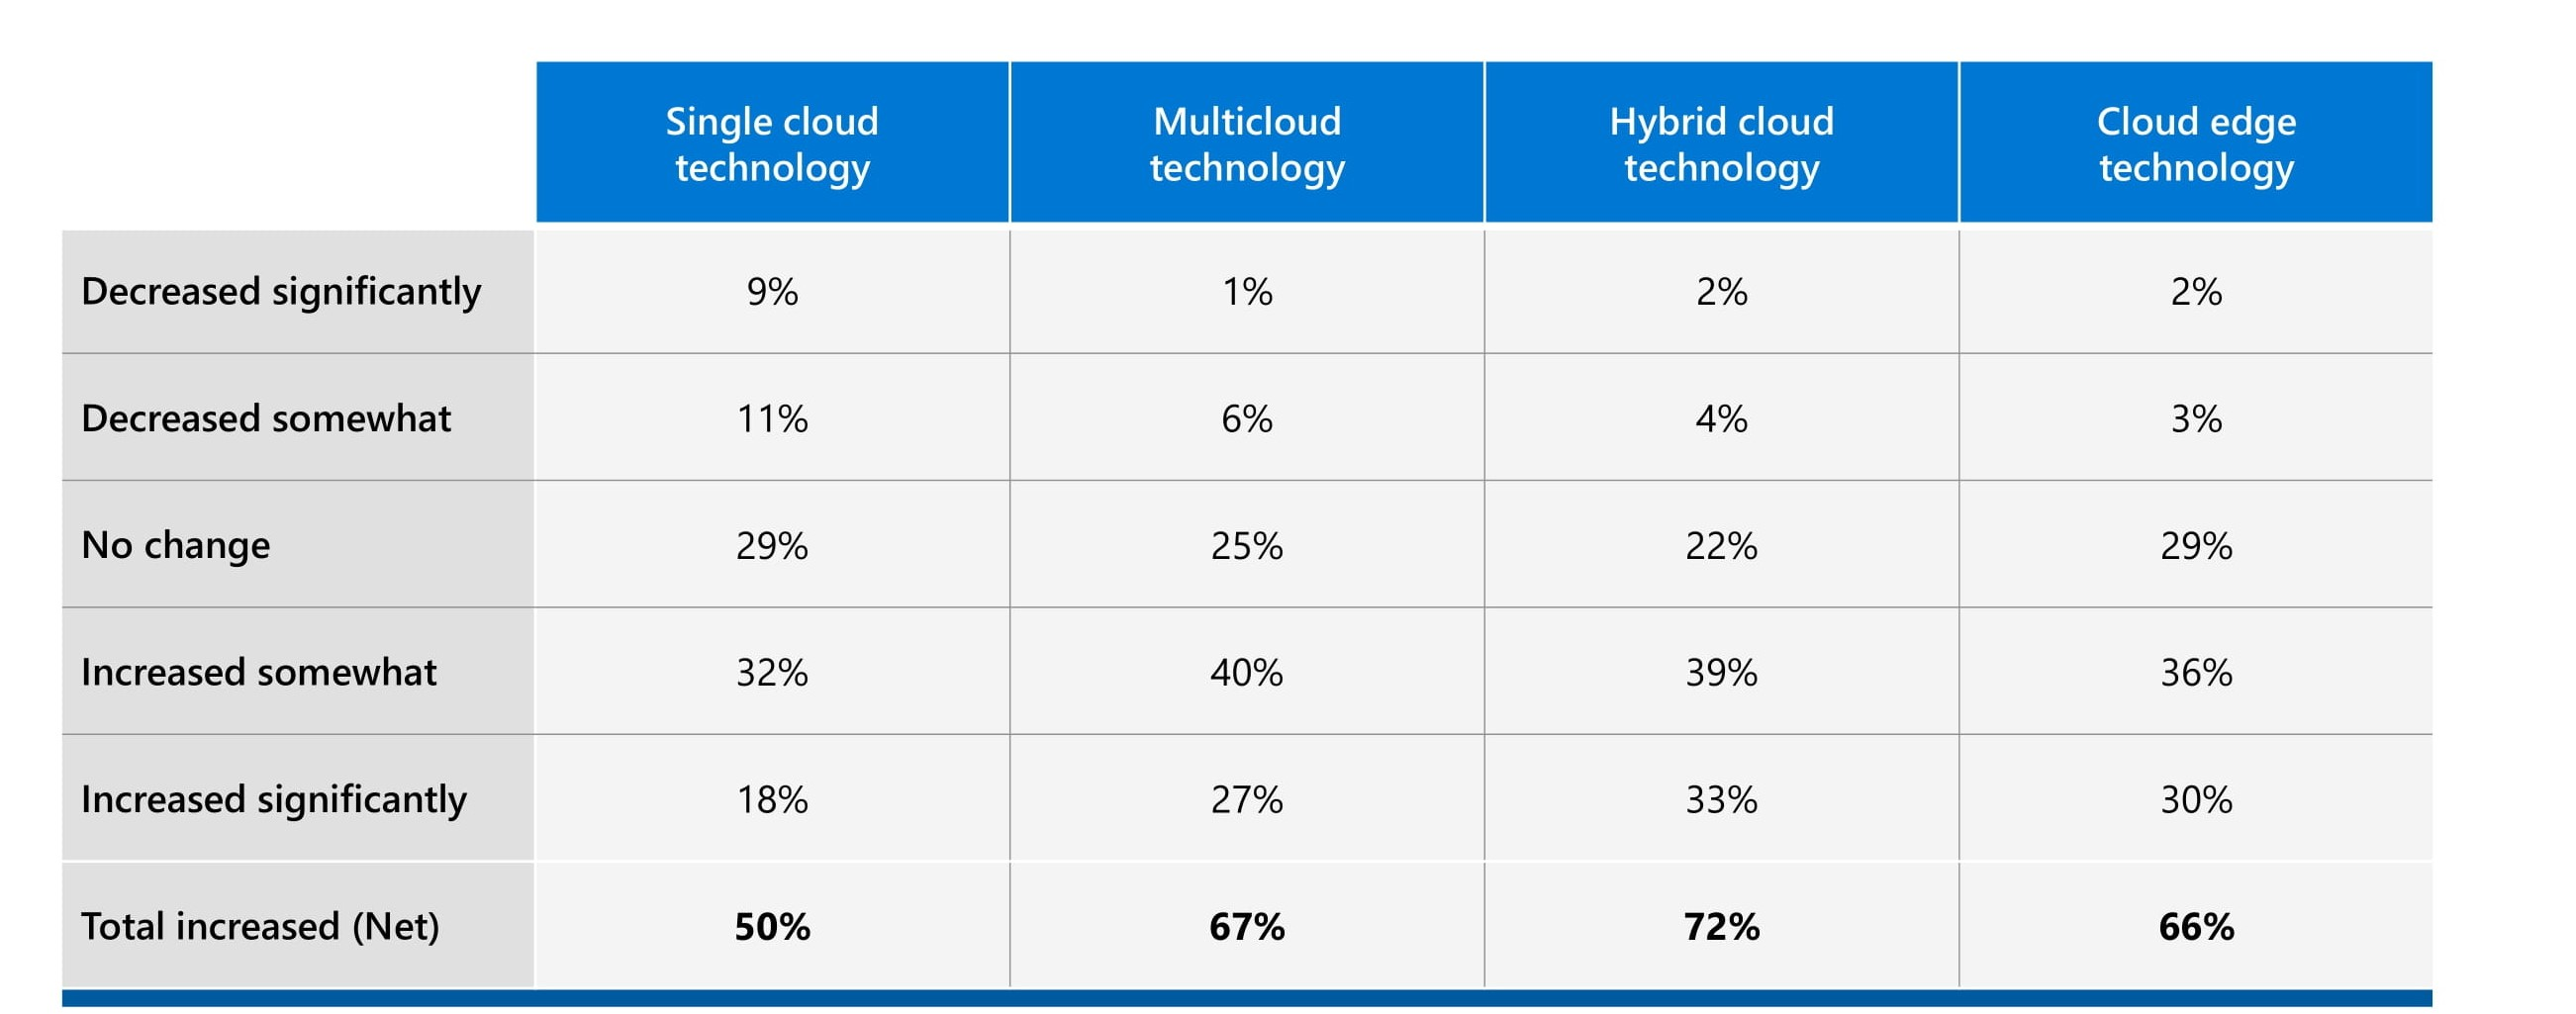 According to the figure, multi-cloud usage is expected to increase by 67%, while hybrid cloud usage will increase by 72%.